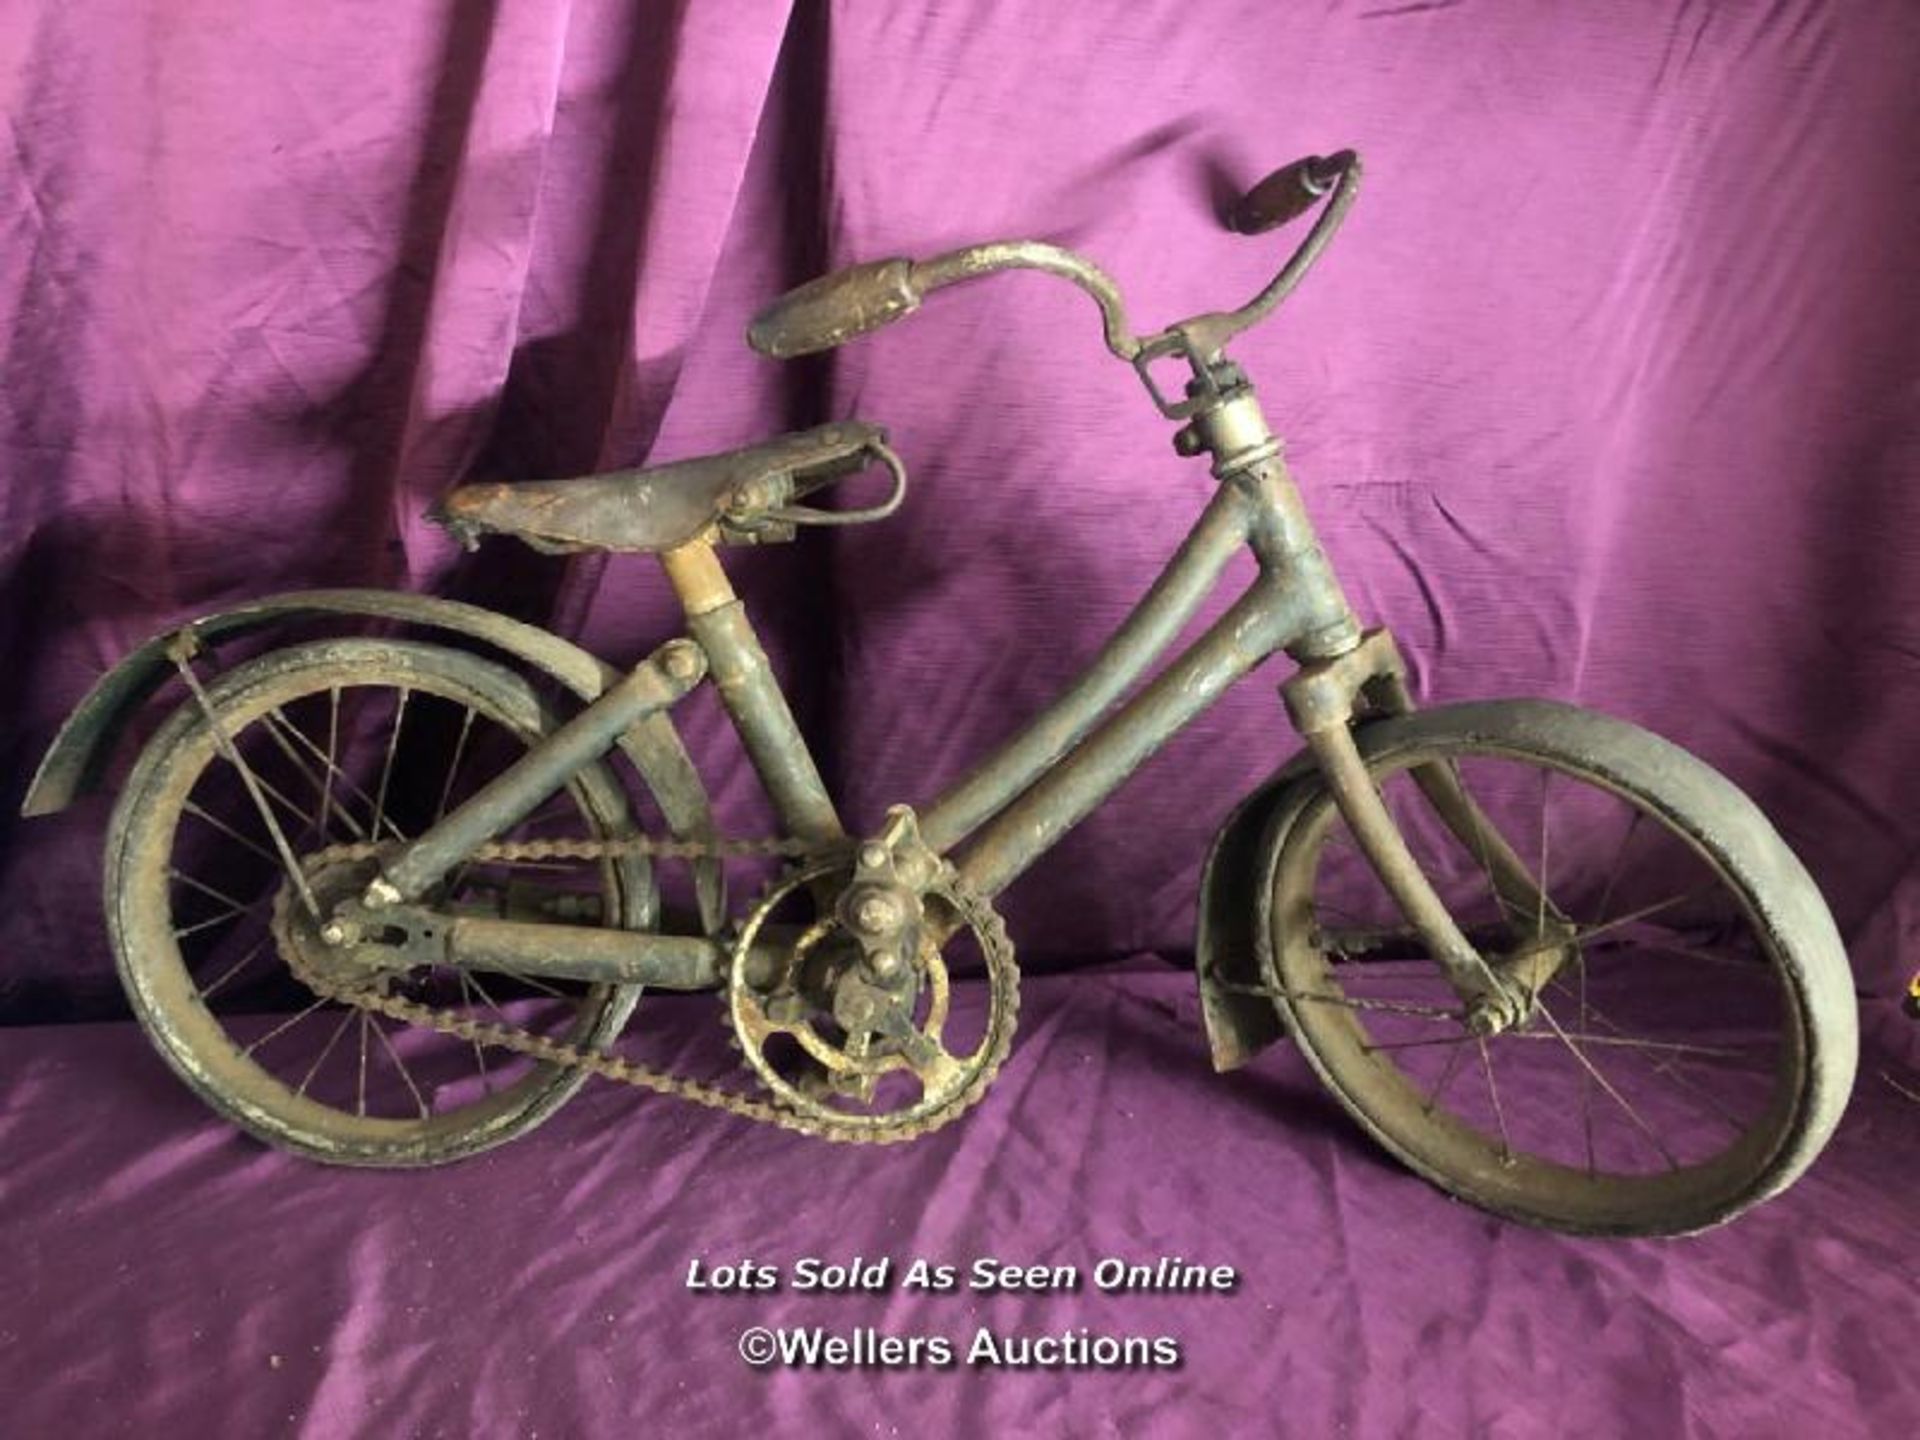 CIRCA 1900 VINTAGE CHILDS BICYCLE